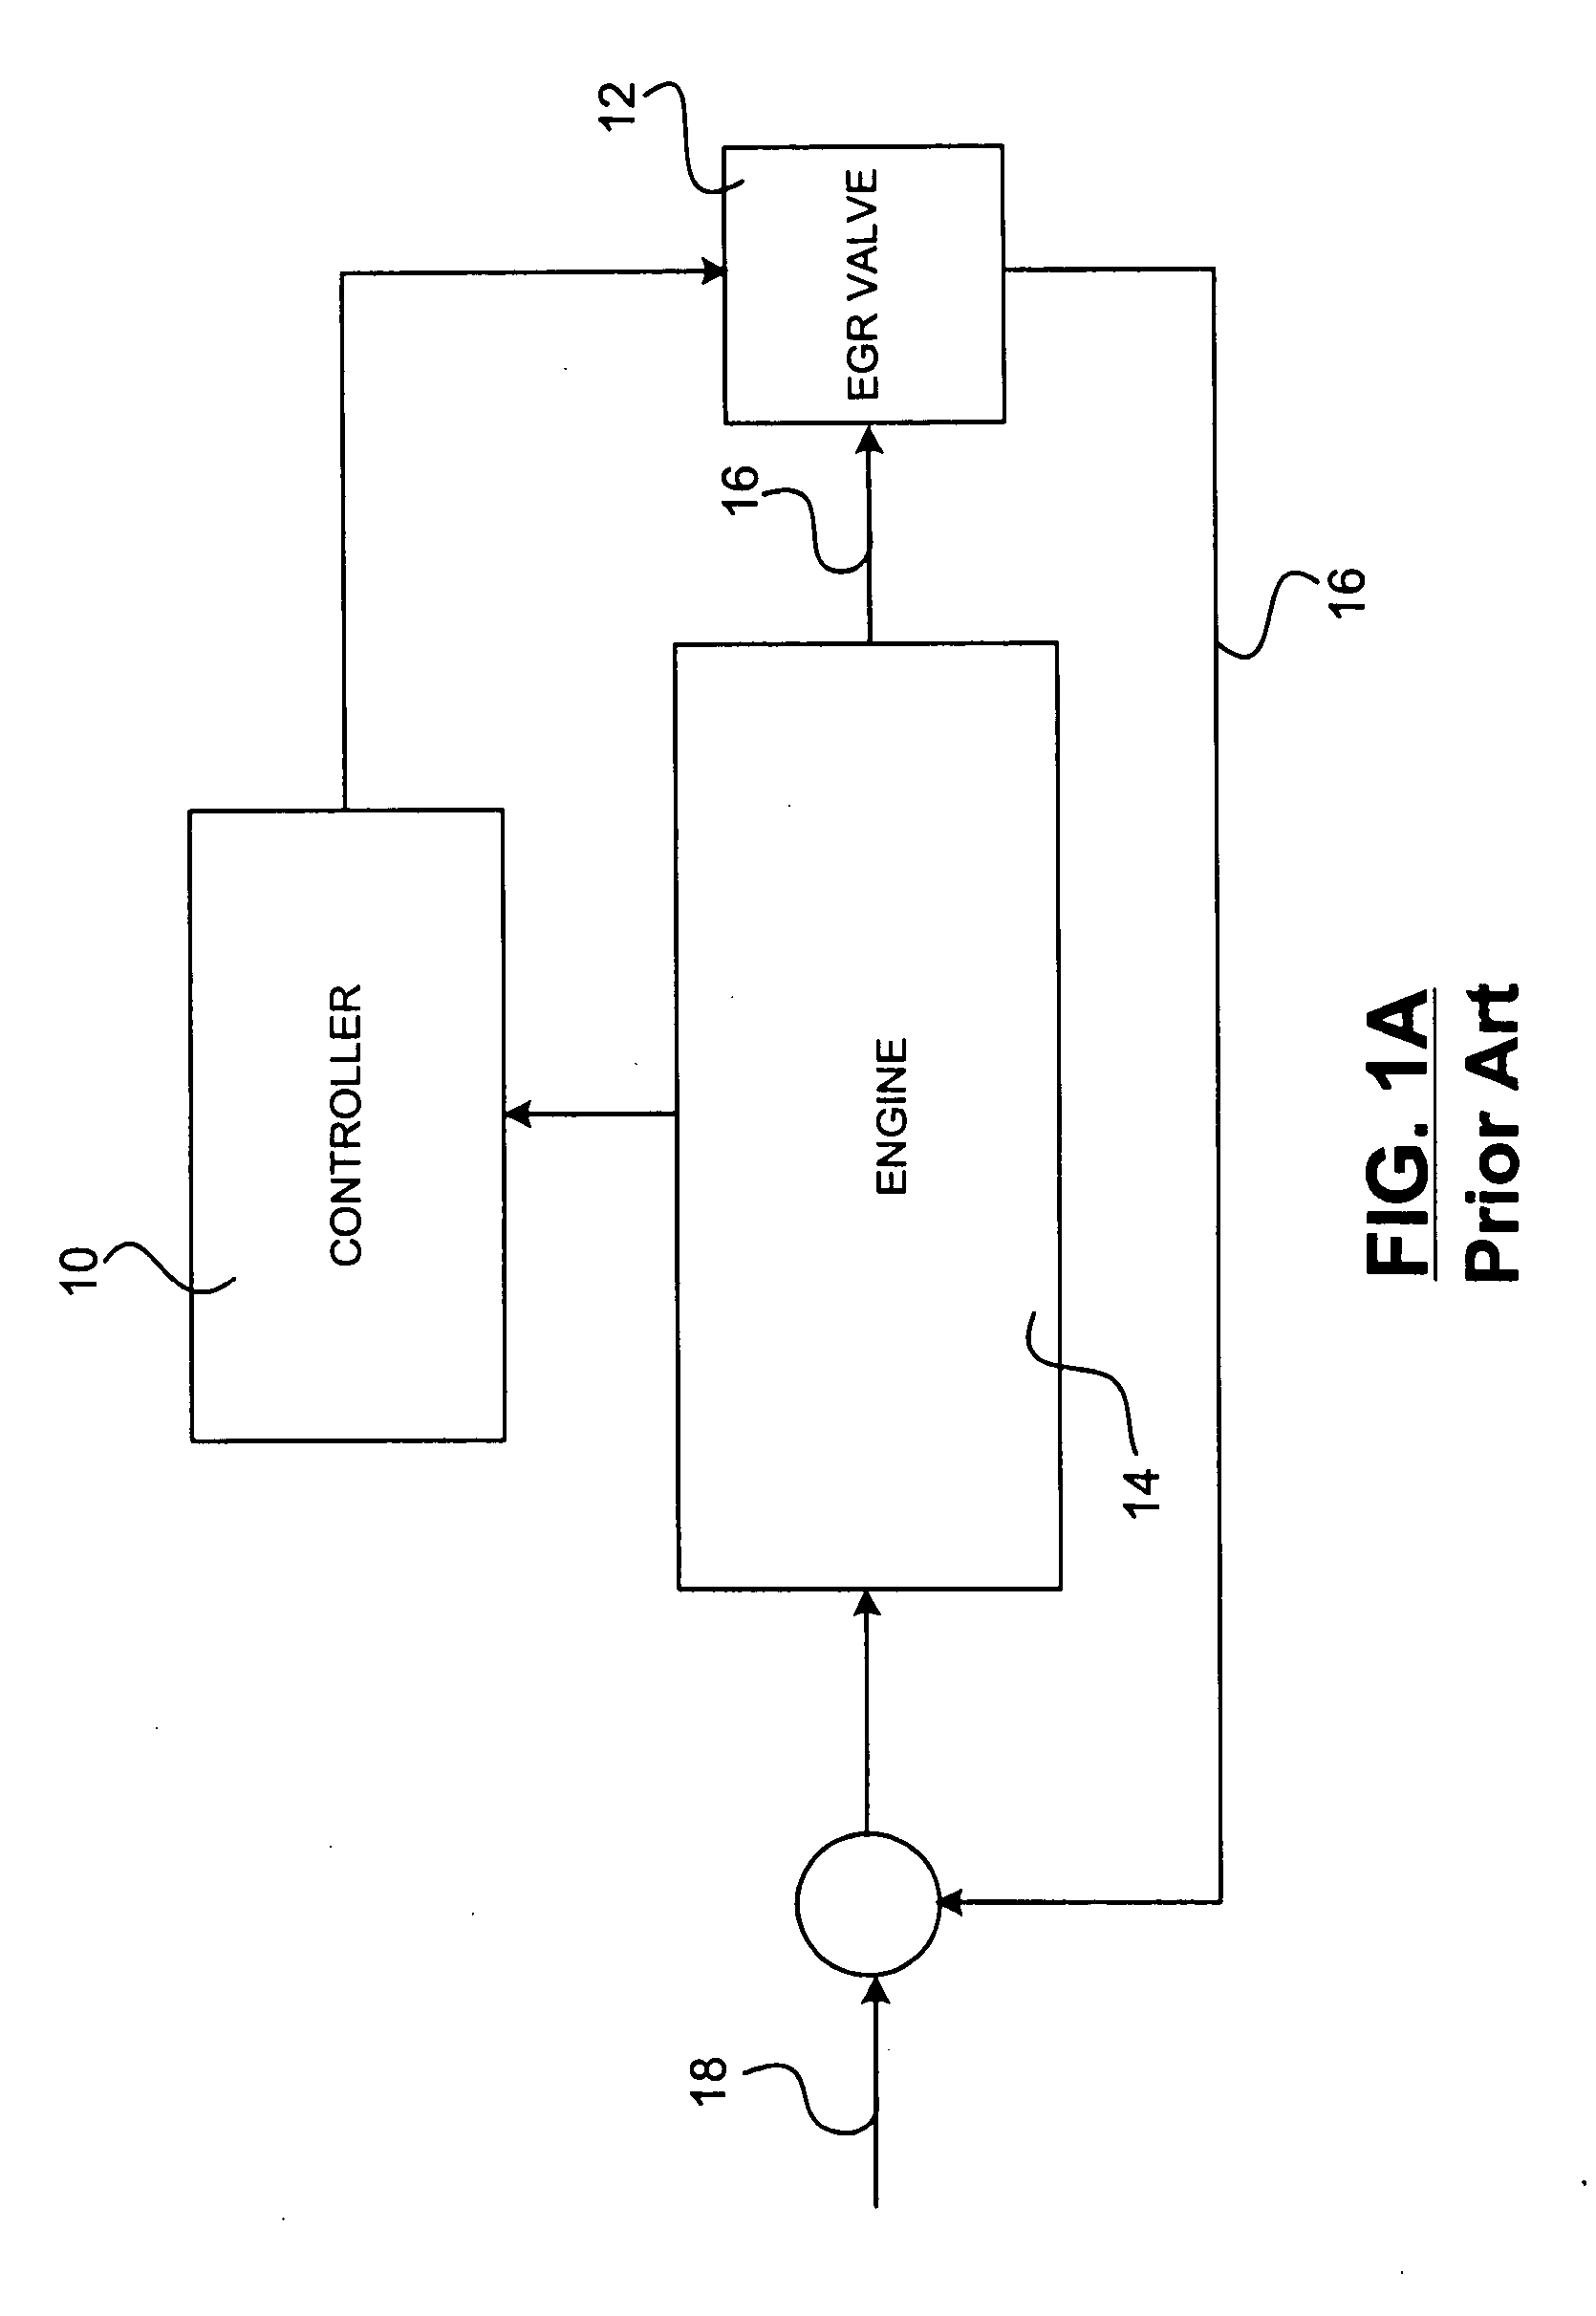 Control system for NOx control for cam phaser and/or EGR systems